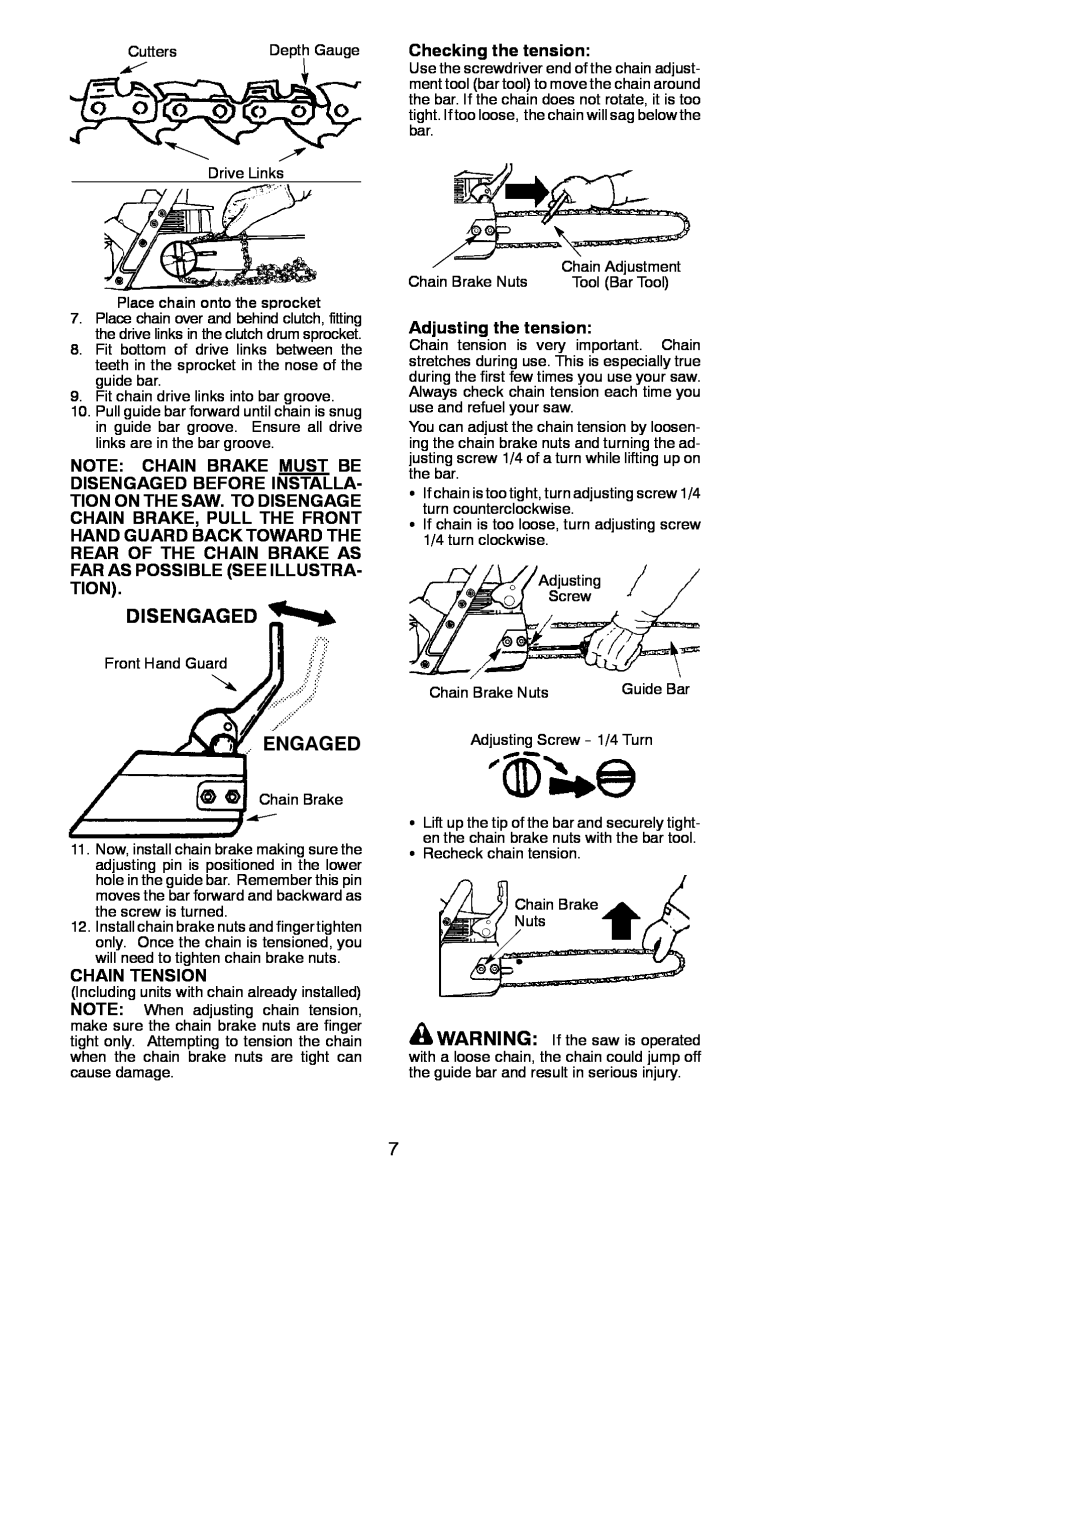 Poulan BH 2160 instruction manual Disengaged, Engaged, Checking the tension, Chain Tension, Adjusting the tension 